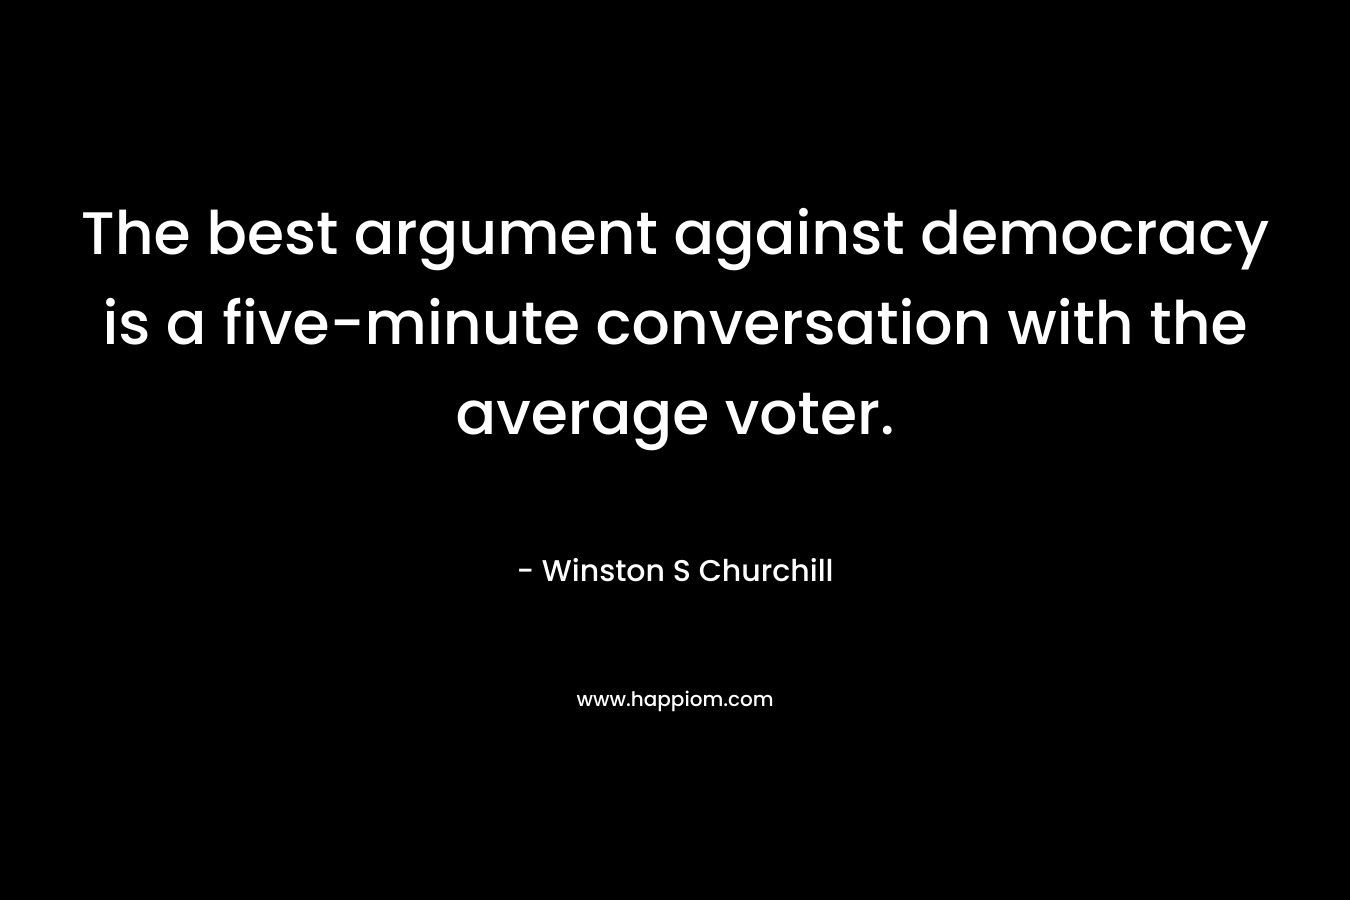 The best argument against democracy is a five-minute conversation with the average voter. – Winston S Churchill